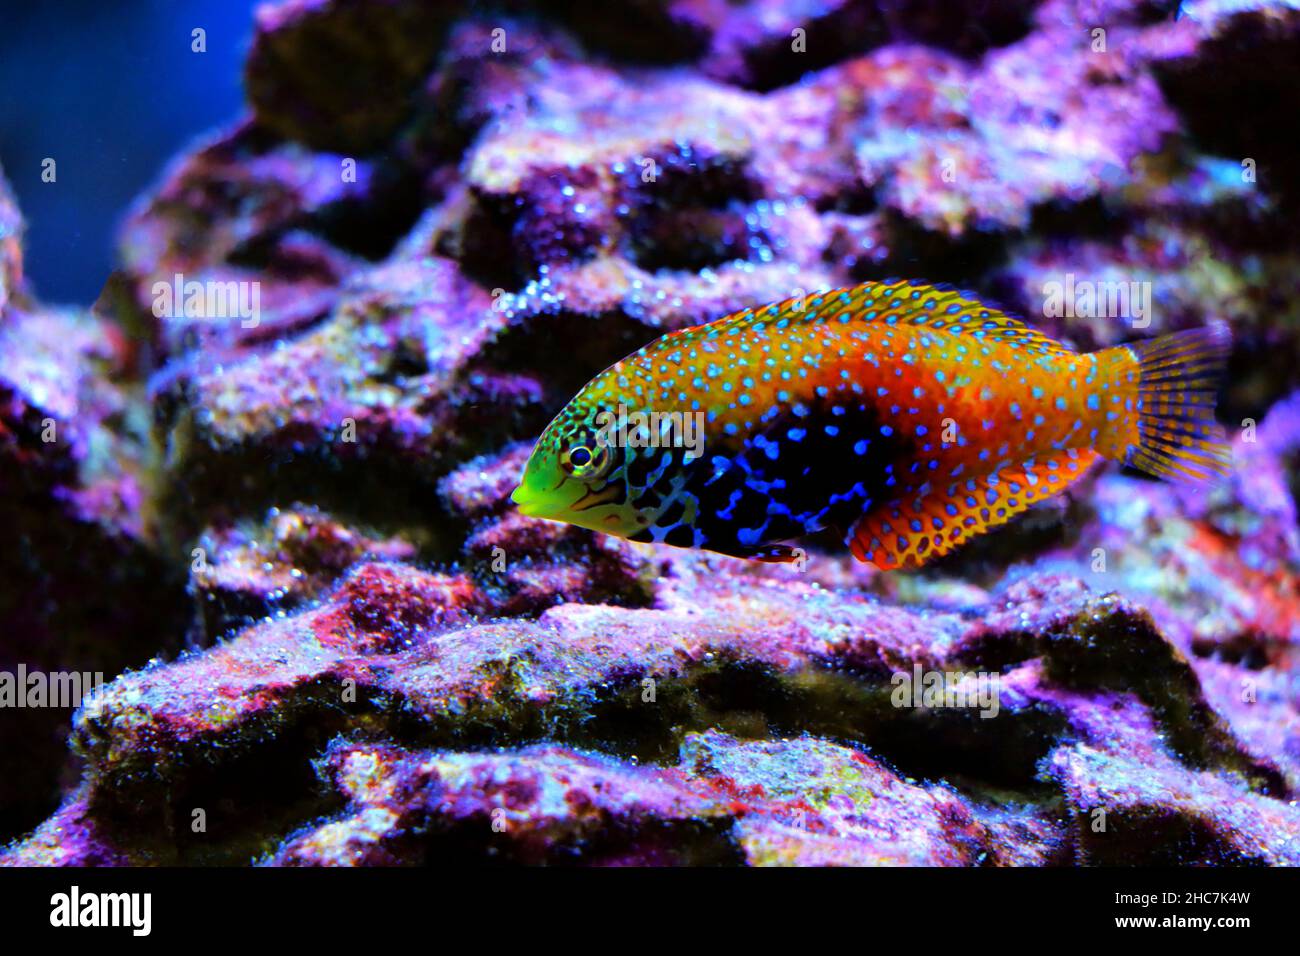 Super Star Of The Reef: The Blue Star Leopard Wrasse–Macropharyngodon  bipartitus